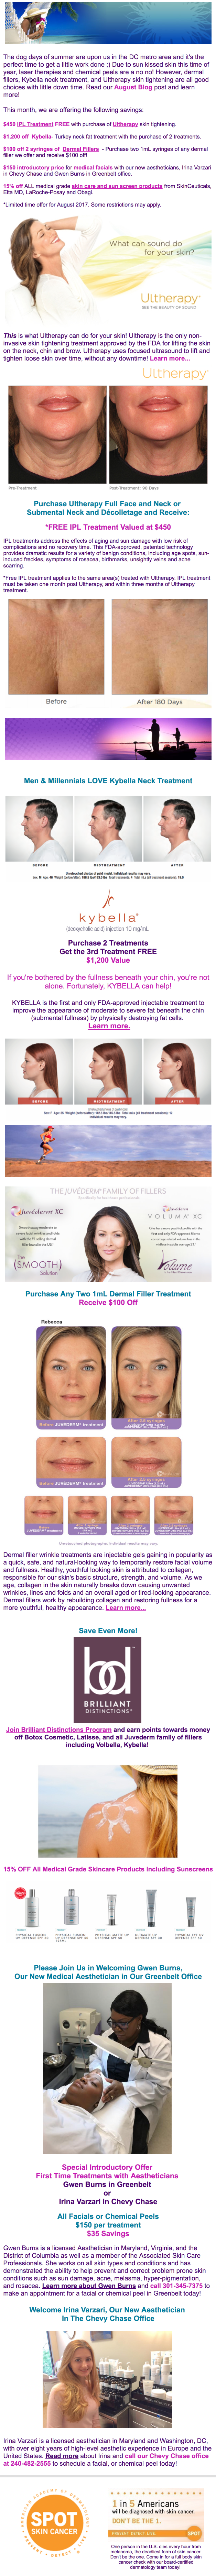 discount on botox and kybella 